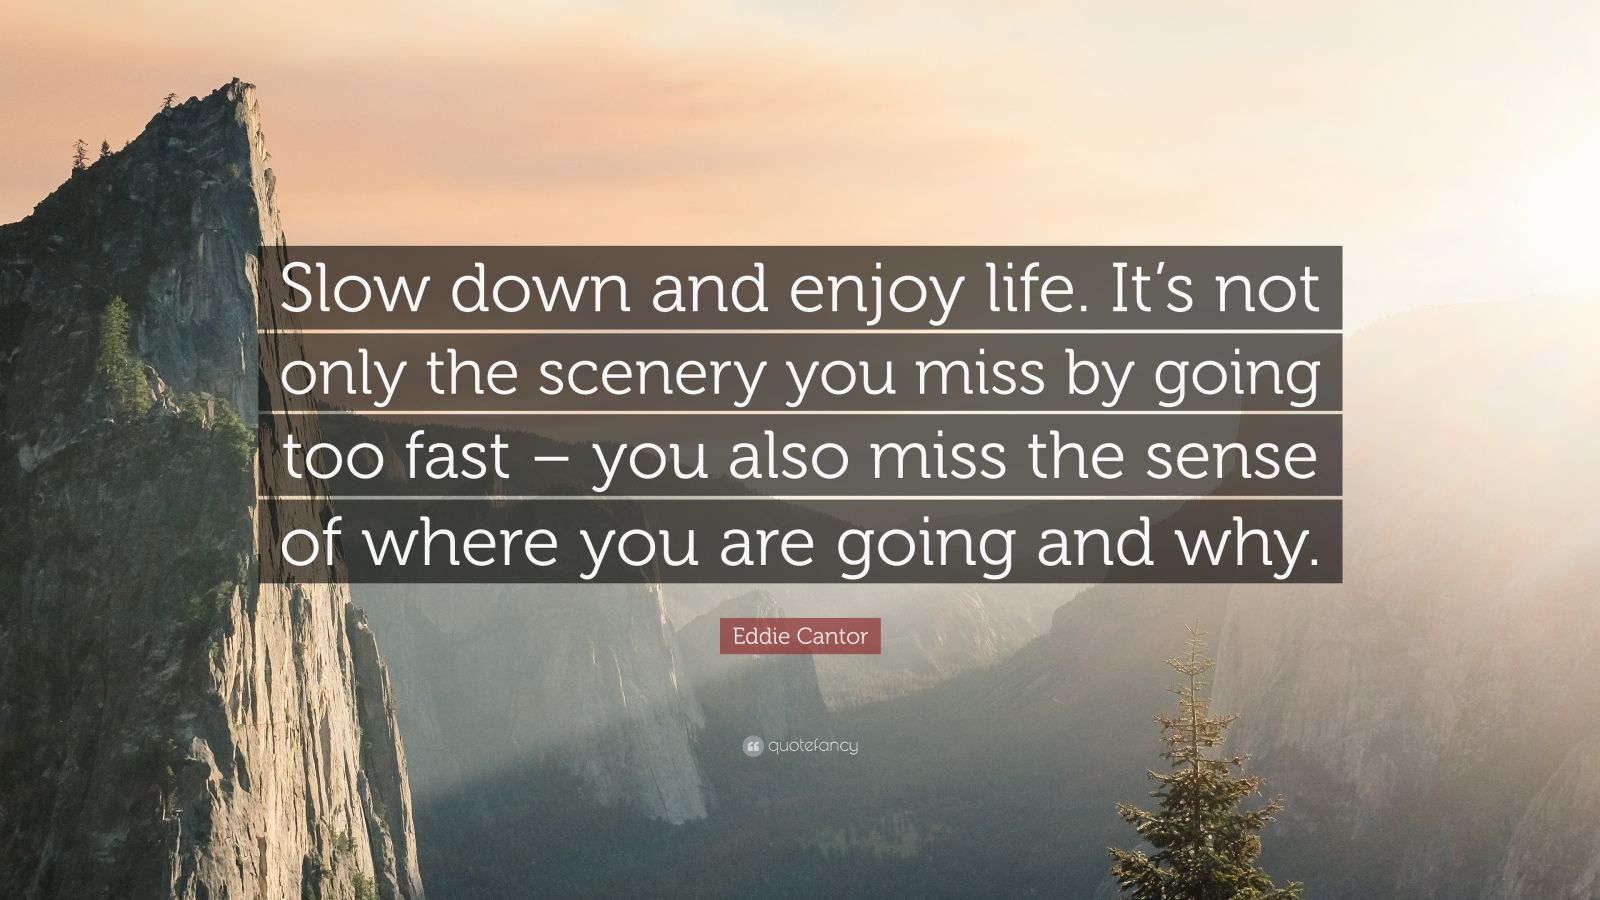 Eddie Cantor Quote: “Slow down and enjoy life. It’s not only the